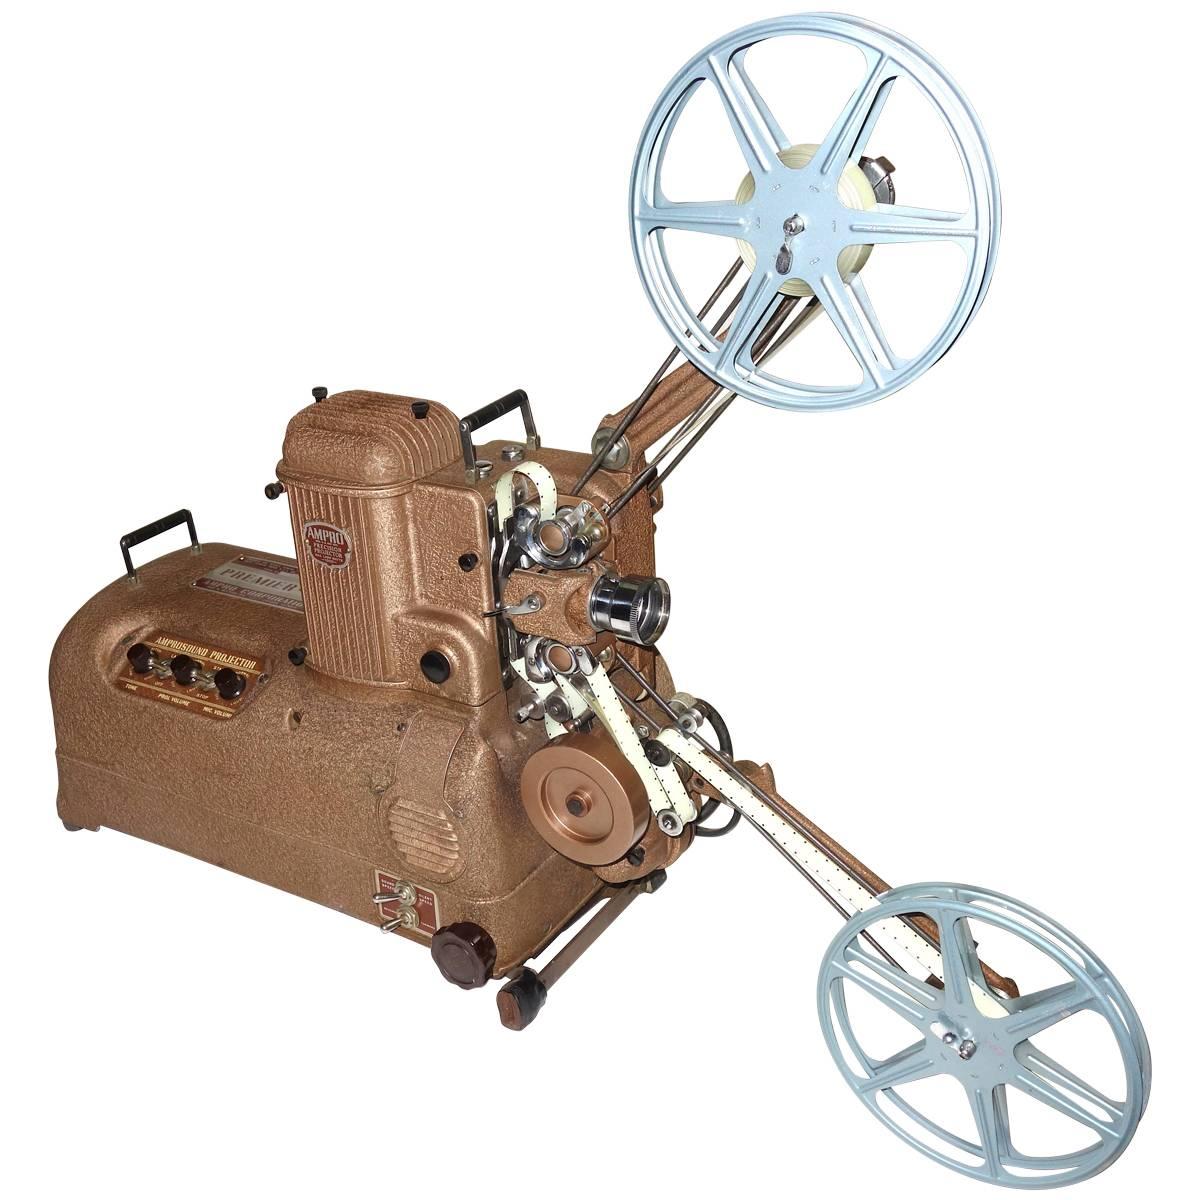 Cinema Projector, Fab Sculpture Display Movie Artifact, circa 1940s For Sale